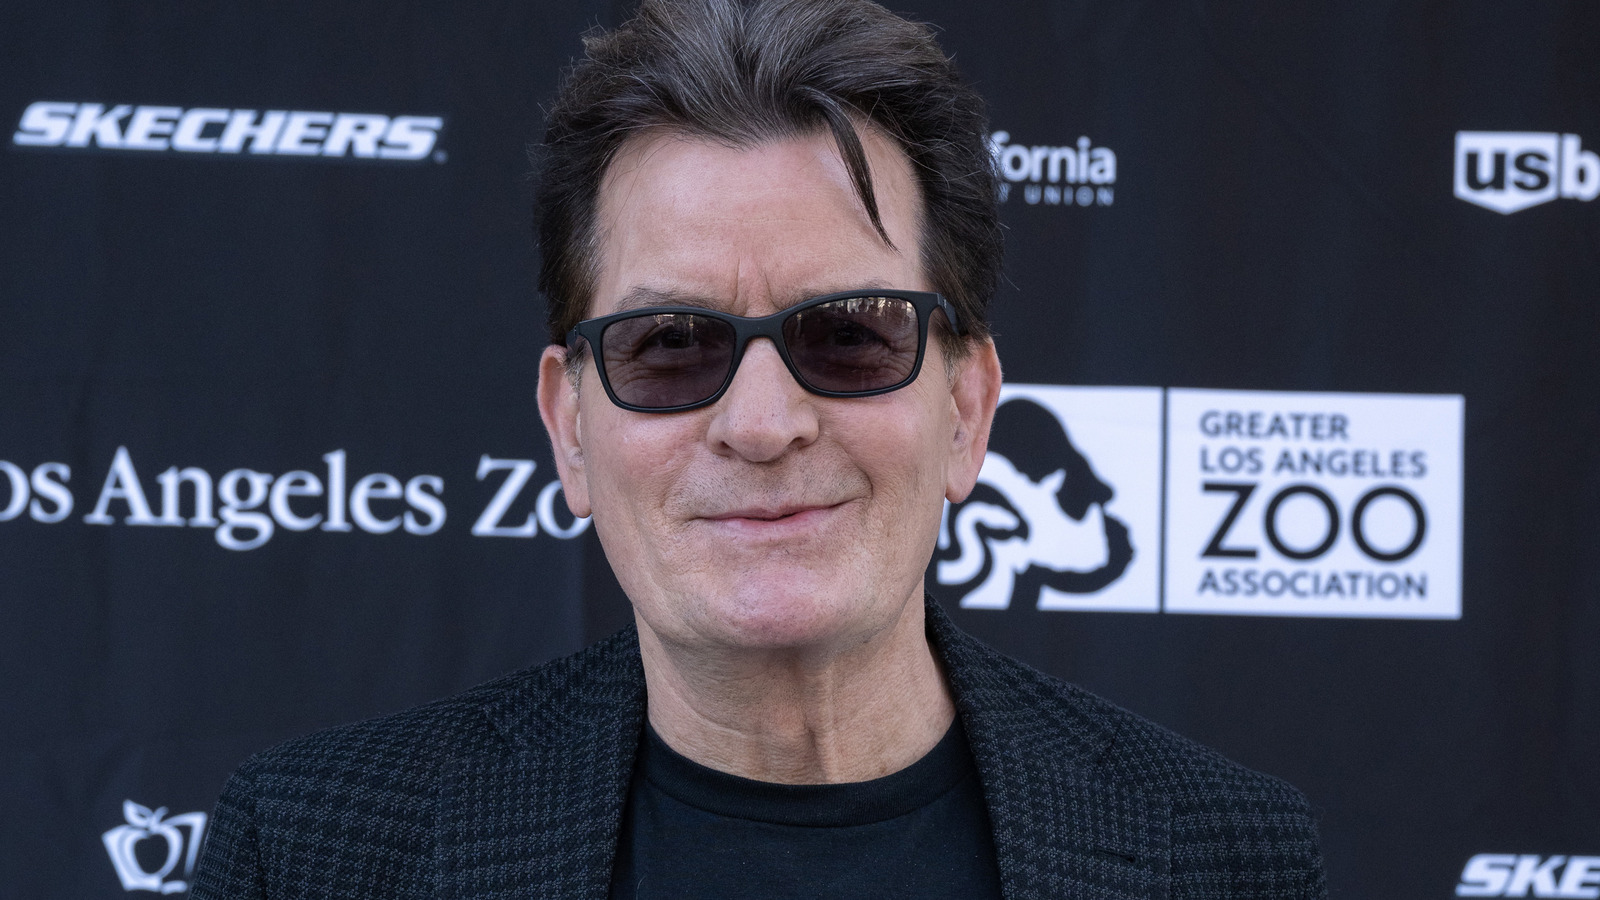 What Has Happened To Charlie Sheen And Why Is He Now Out Of The Spotlight Internewscast Journal